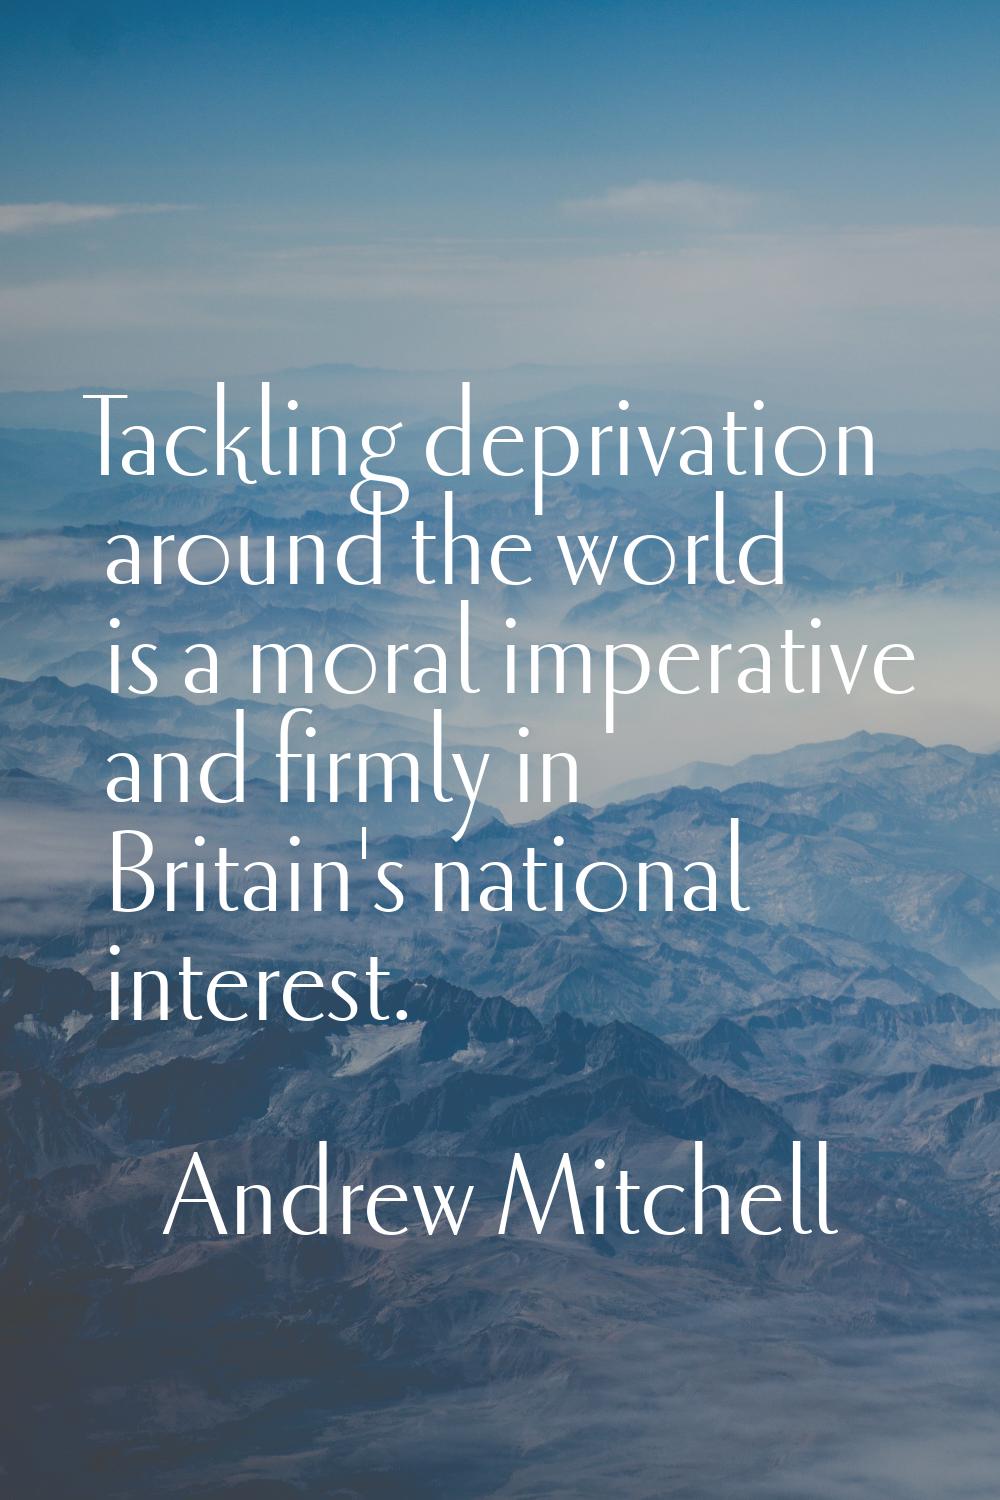 Tackling deprivation around the world is a moral imperative and firmly in Britain's national intere